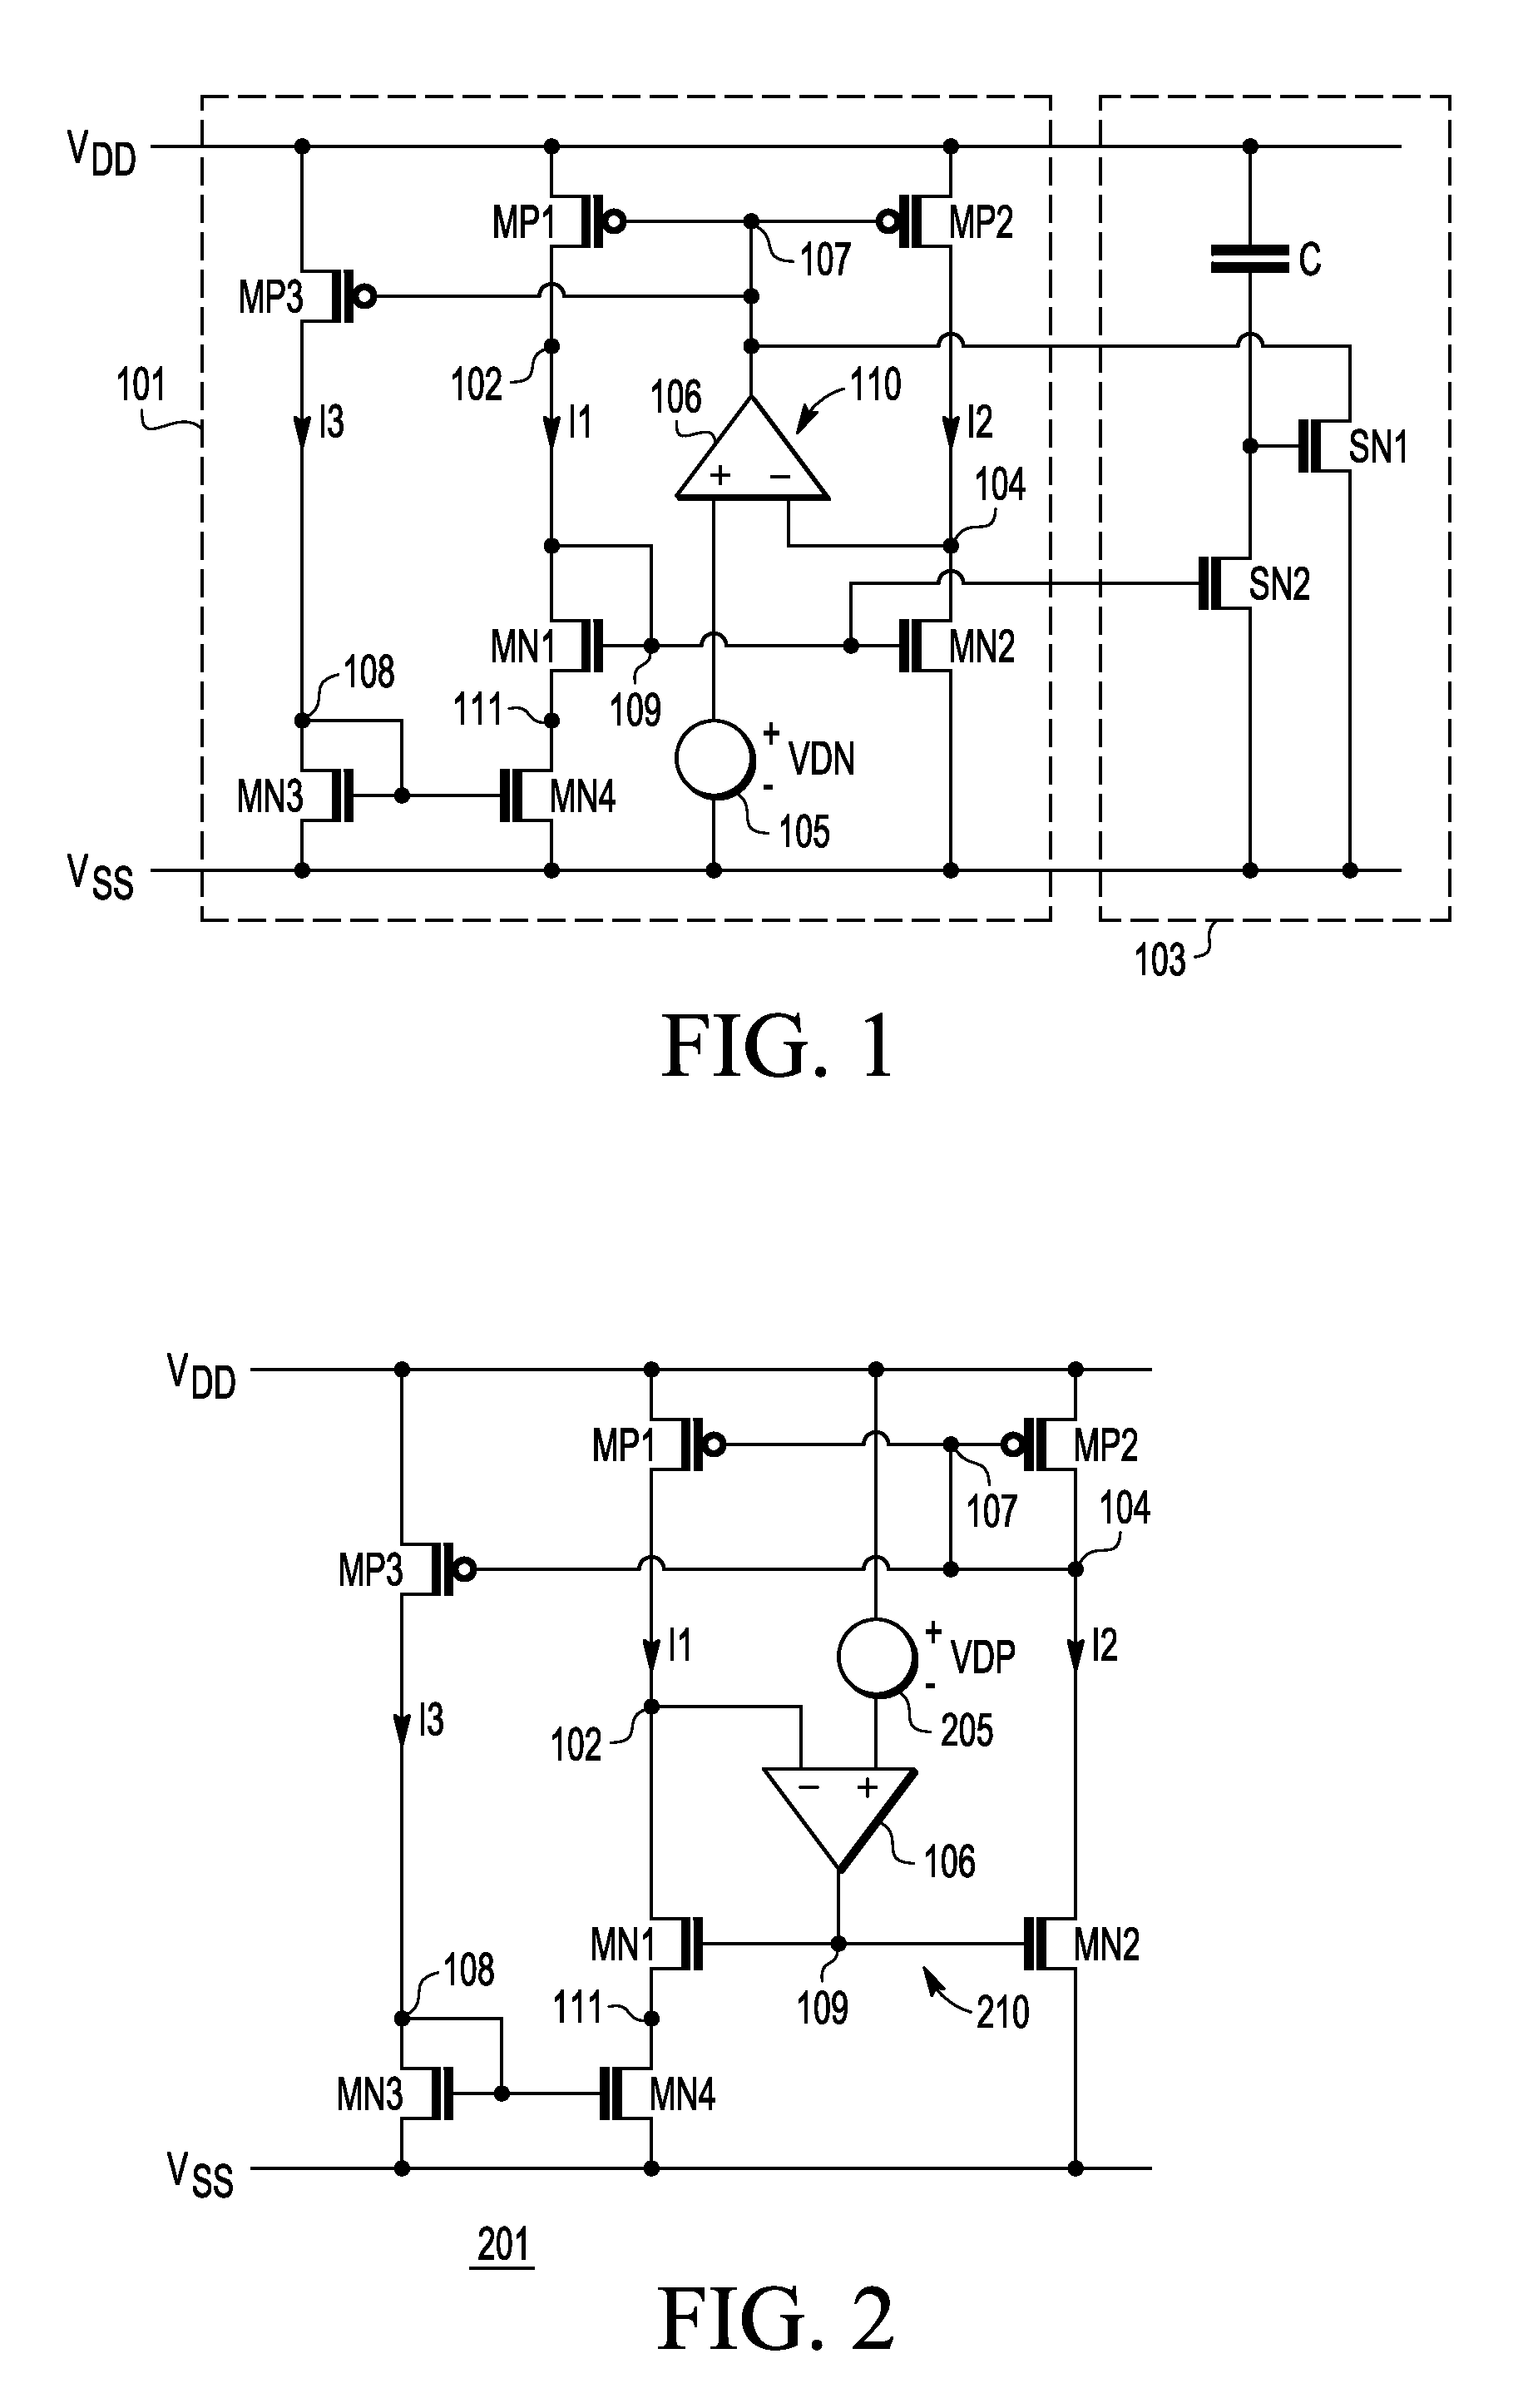 Supply independent current reference generator in CMOS technology